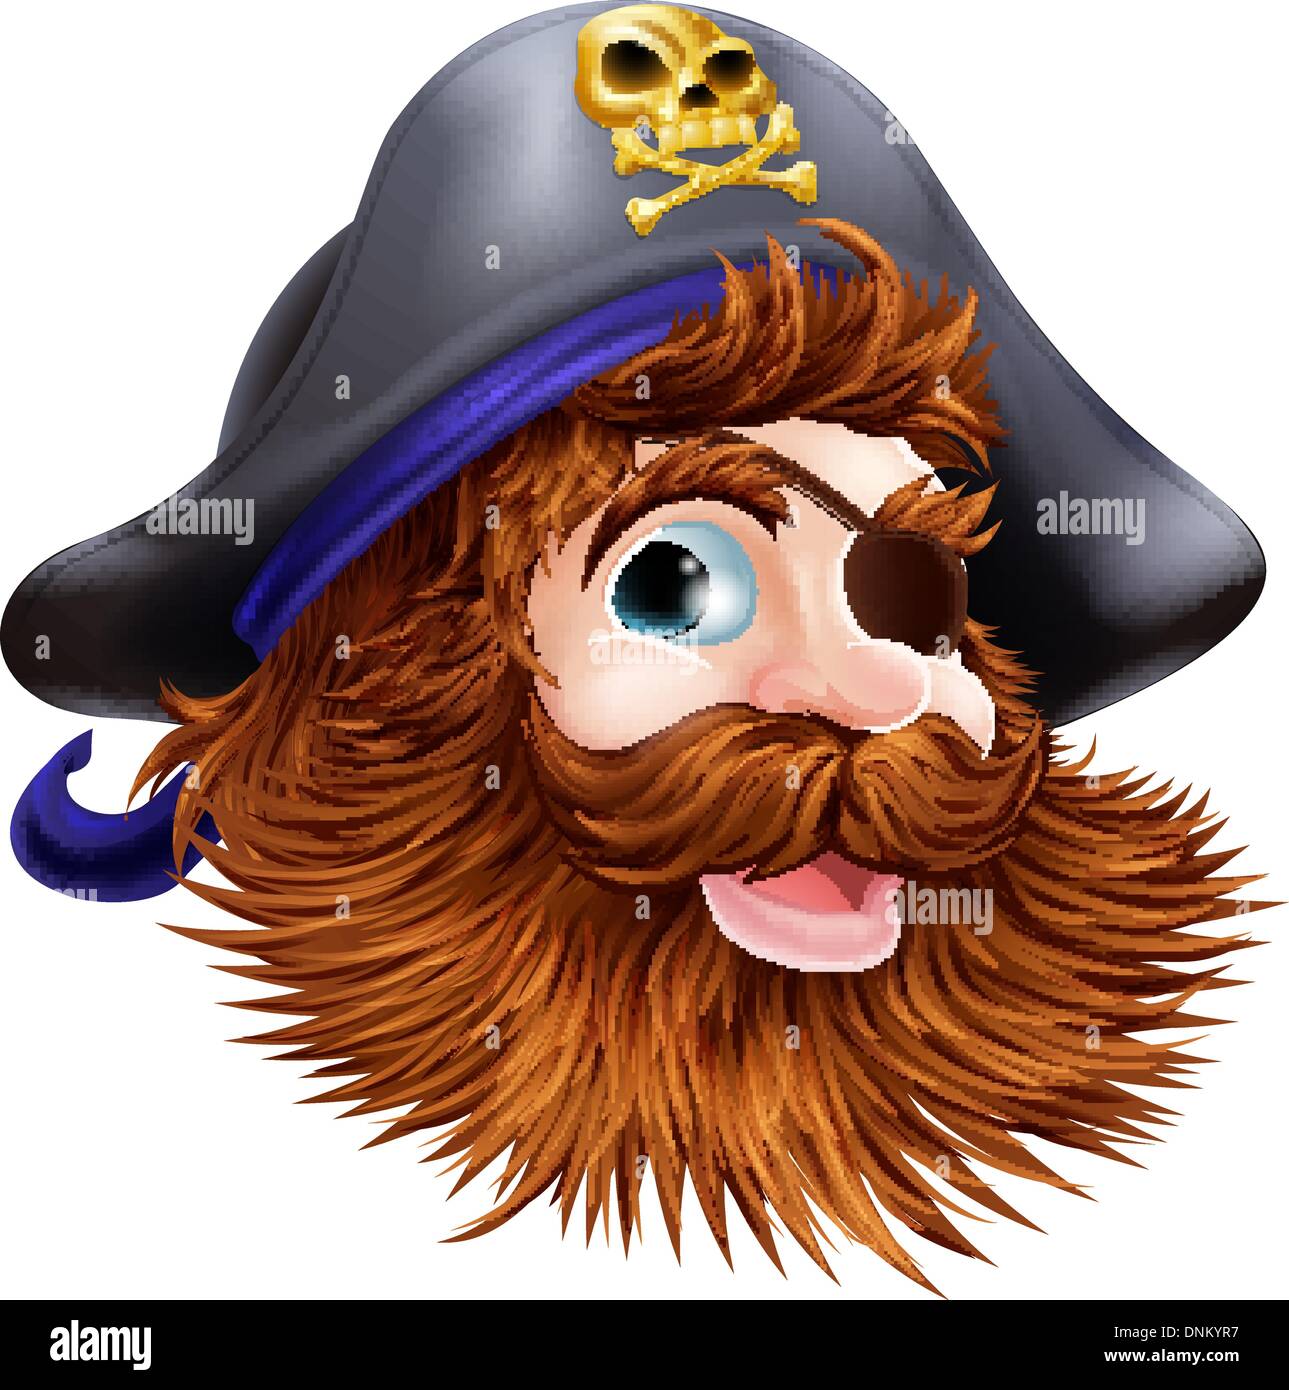 Illustration of a happy smiling pirate face with an eye patch and skull and crossed bones on his pirate hat Stock Vector